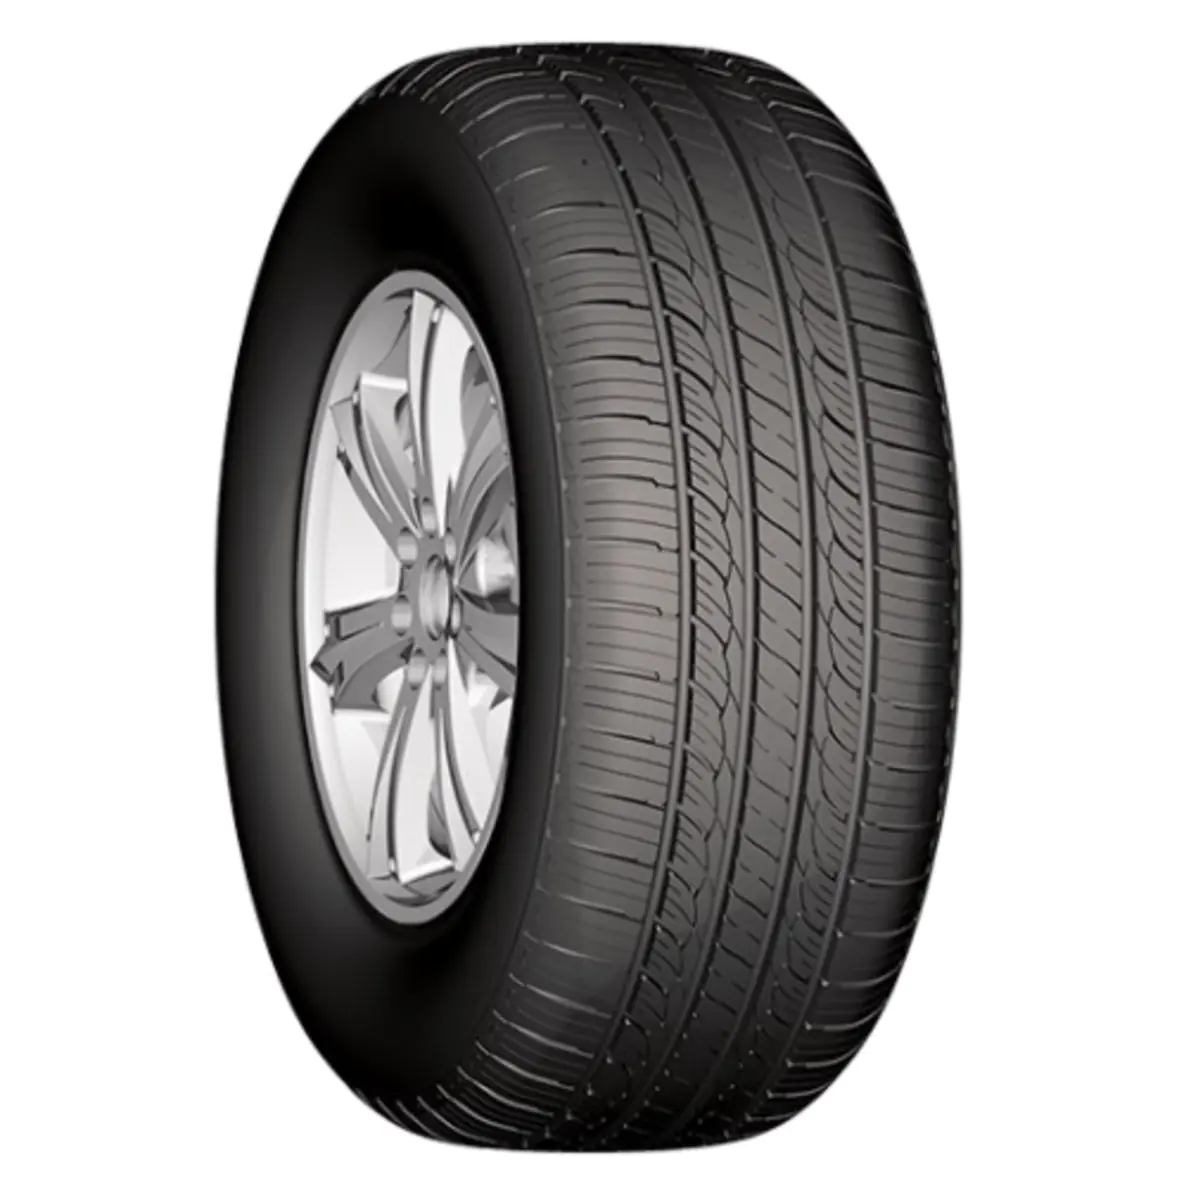 Gomme Autovettura Windforce 155/80 R13 79T CATCHFORS A/S 4STAG M+S All Season